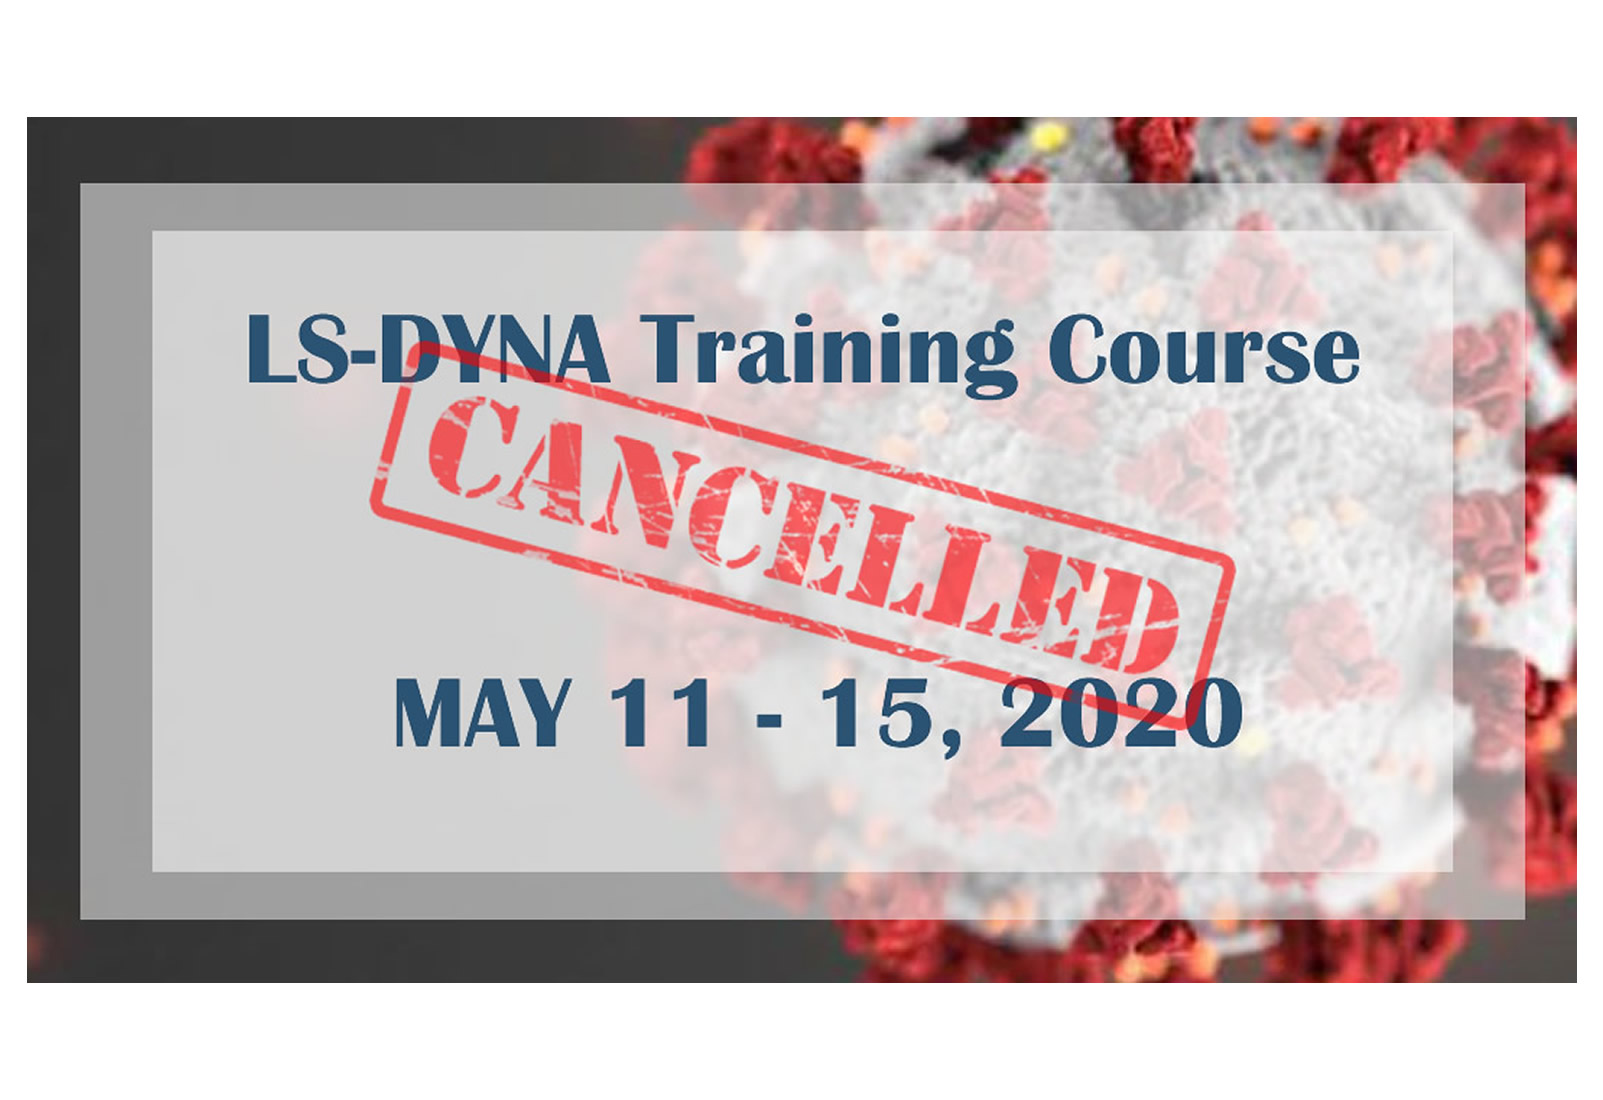 May 11 – 15, 2020 LS-DYNA Training Course has been canceled